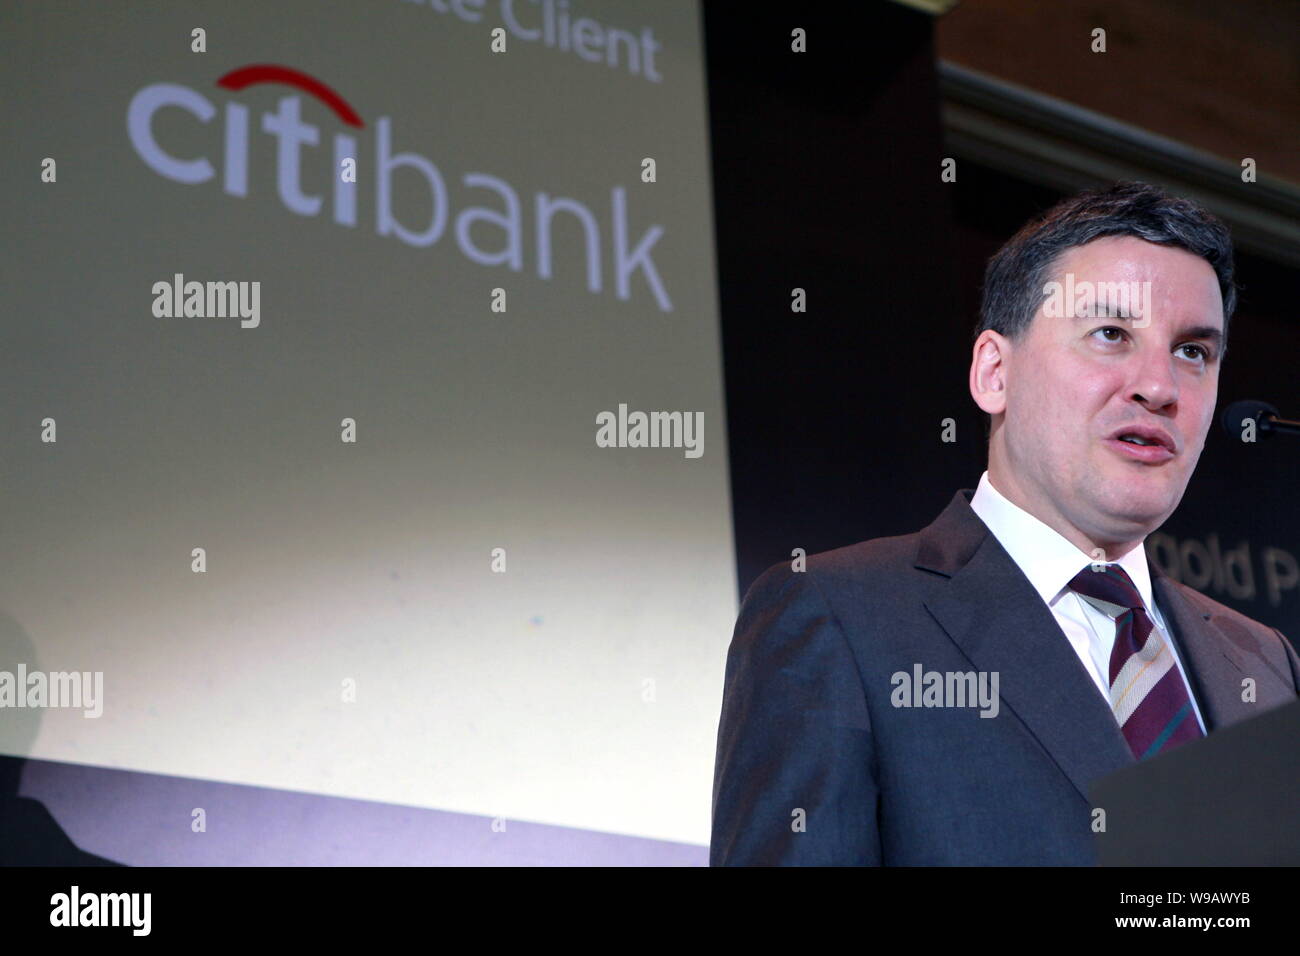 Jonathan Larsen, Head of Consumer Banking and Global Cards for Asia Pacific of Citigroup Inc, speaks at a press conference of Citibank in Shanghai, Ch Stock Photo